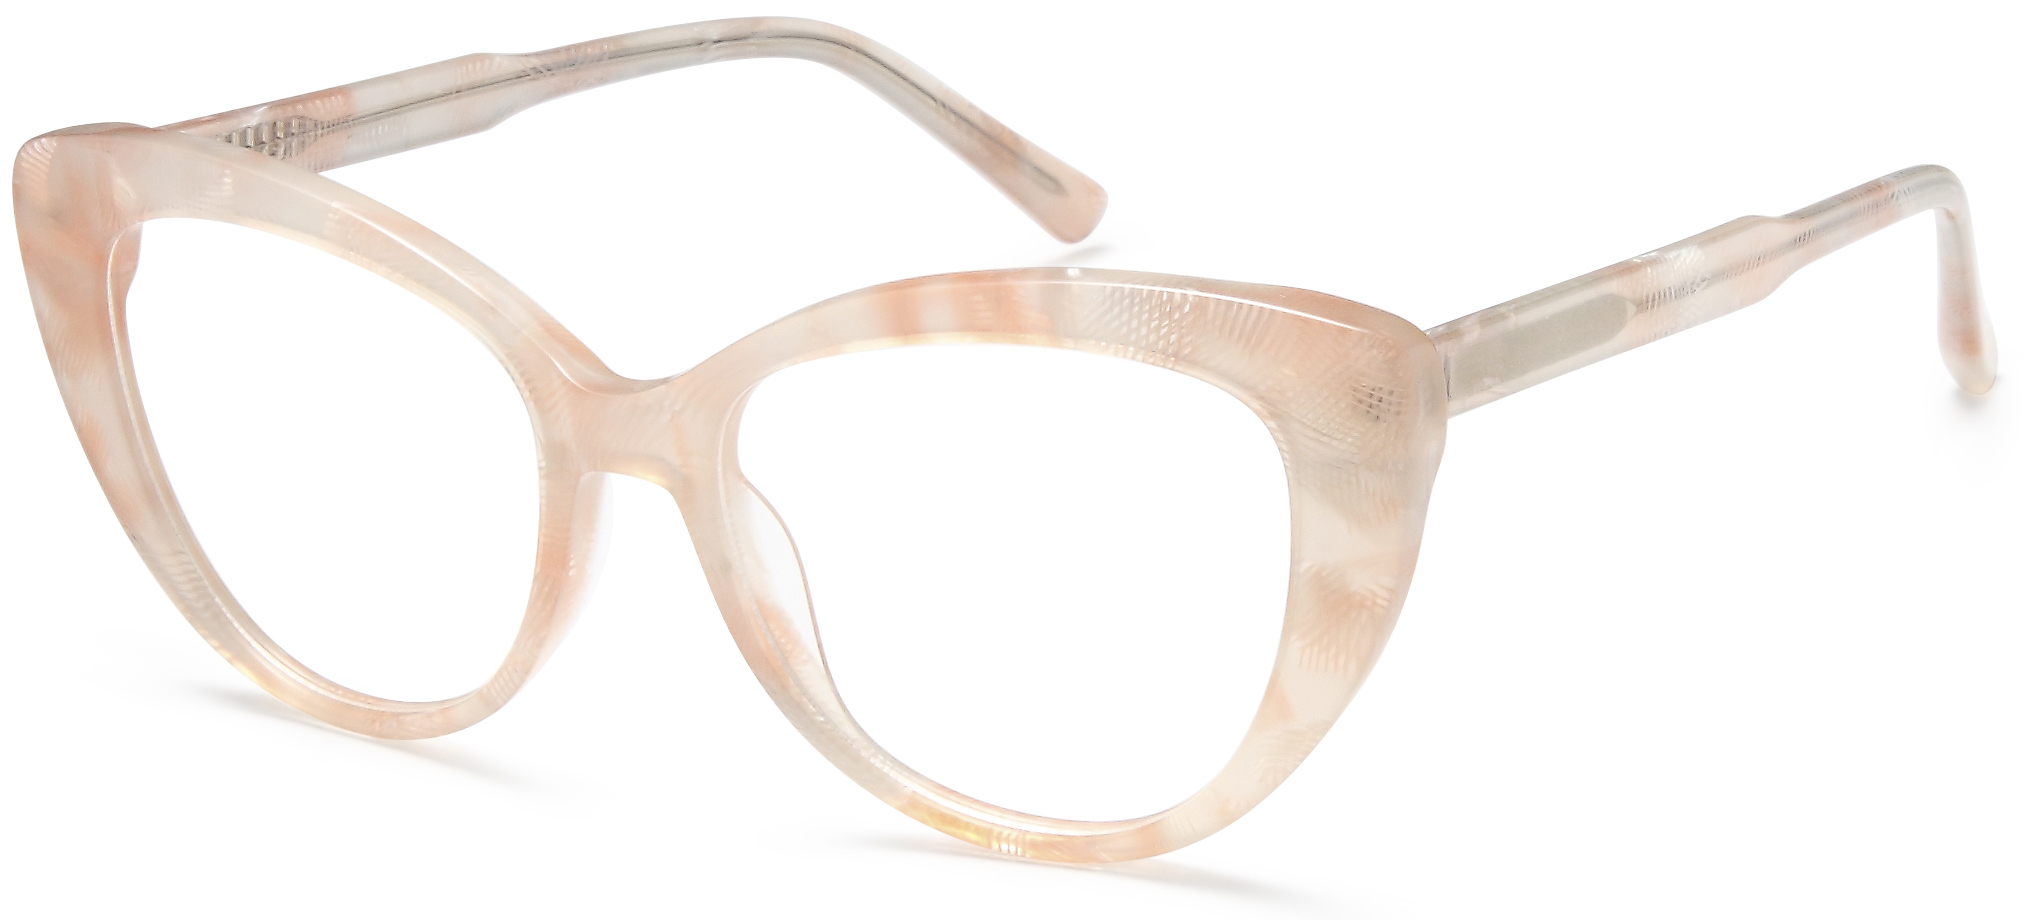 Picture of Candy Shoppe Eyeglasses 21053